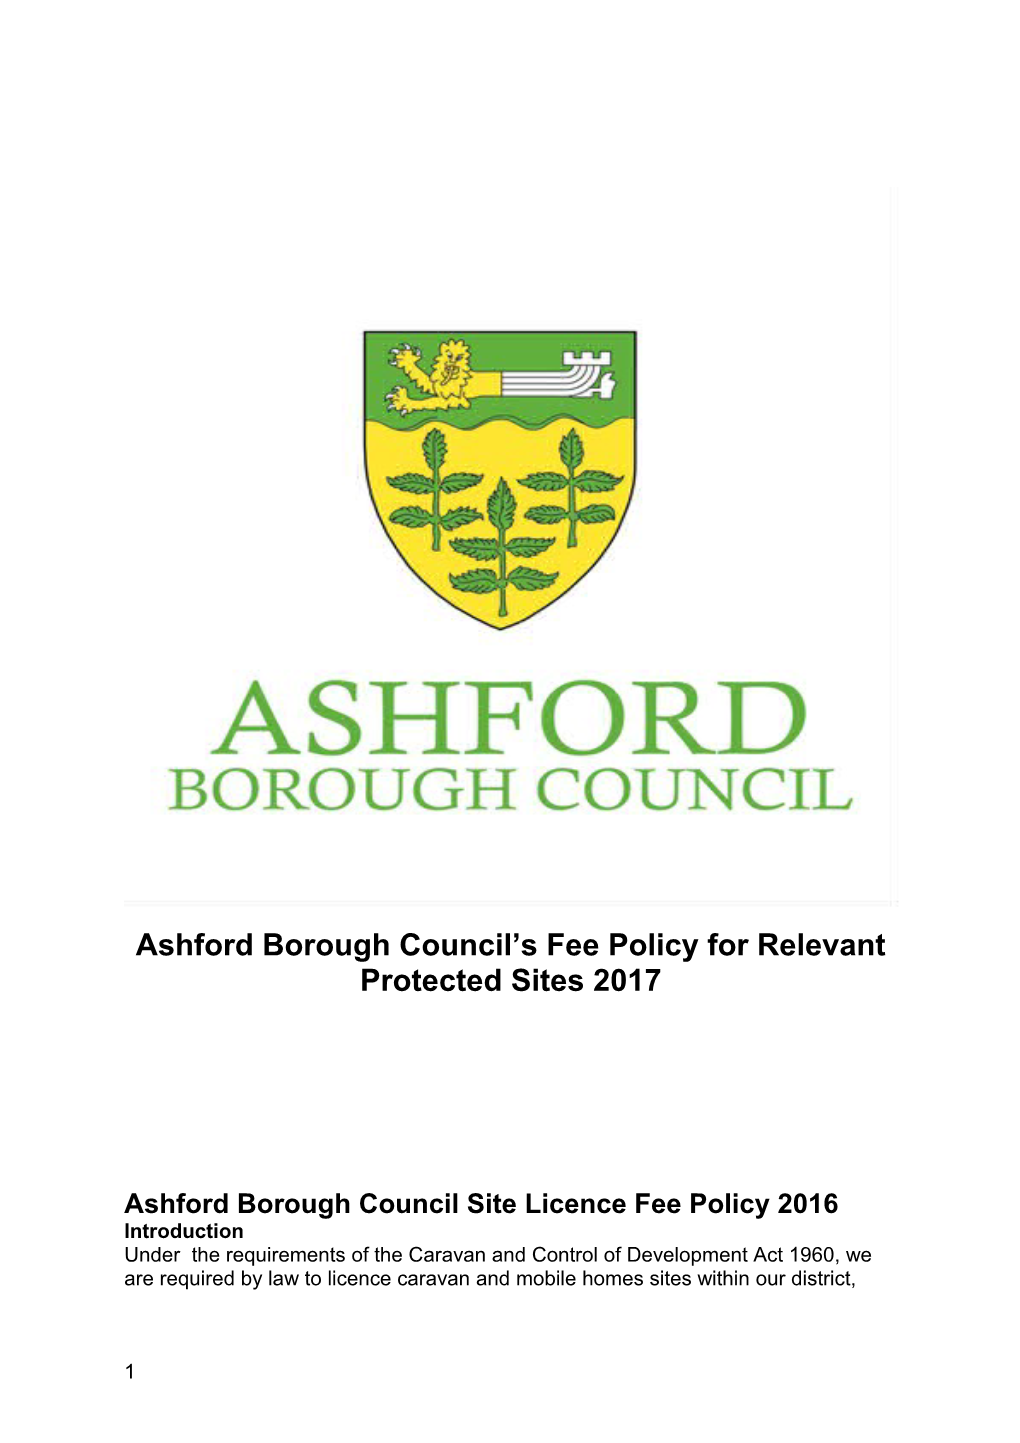 Ashford Borough Council S Fee Policy for Relevant Protected Sites 2017